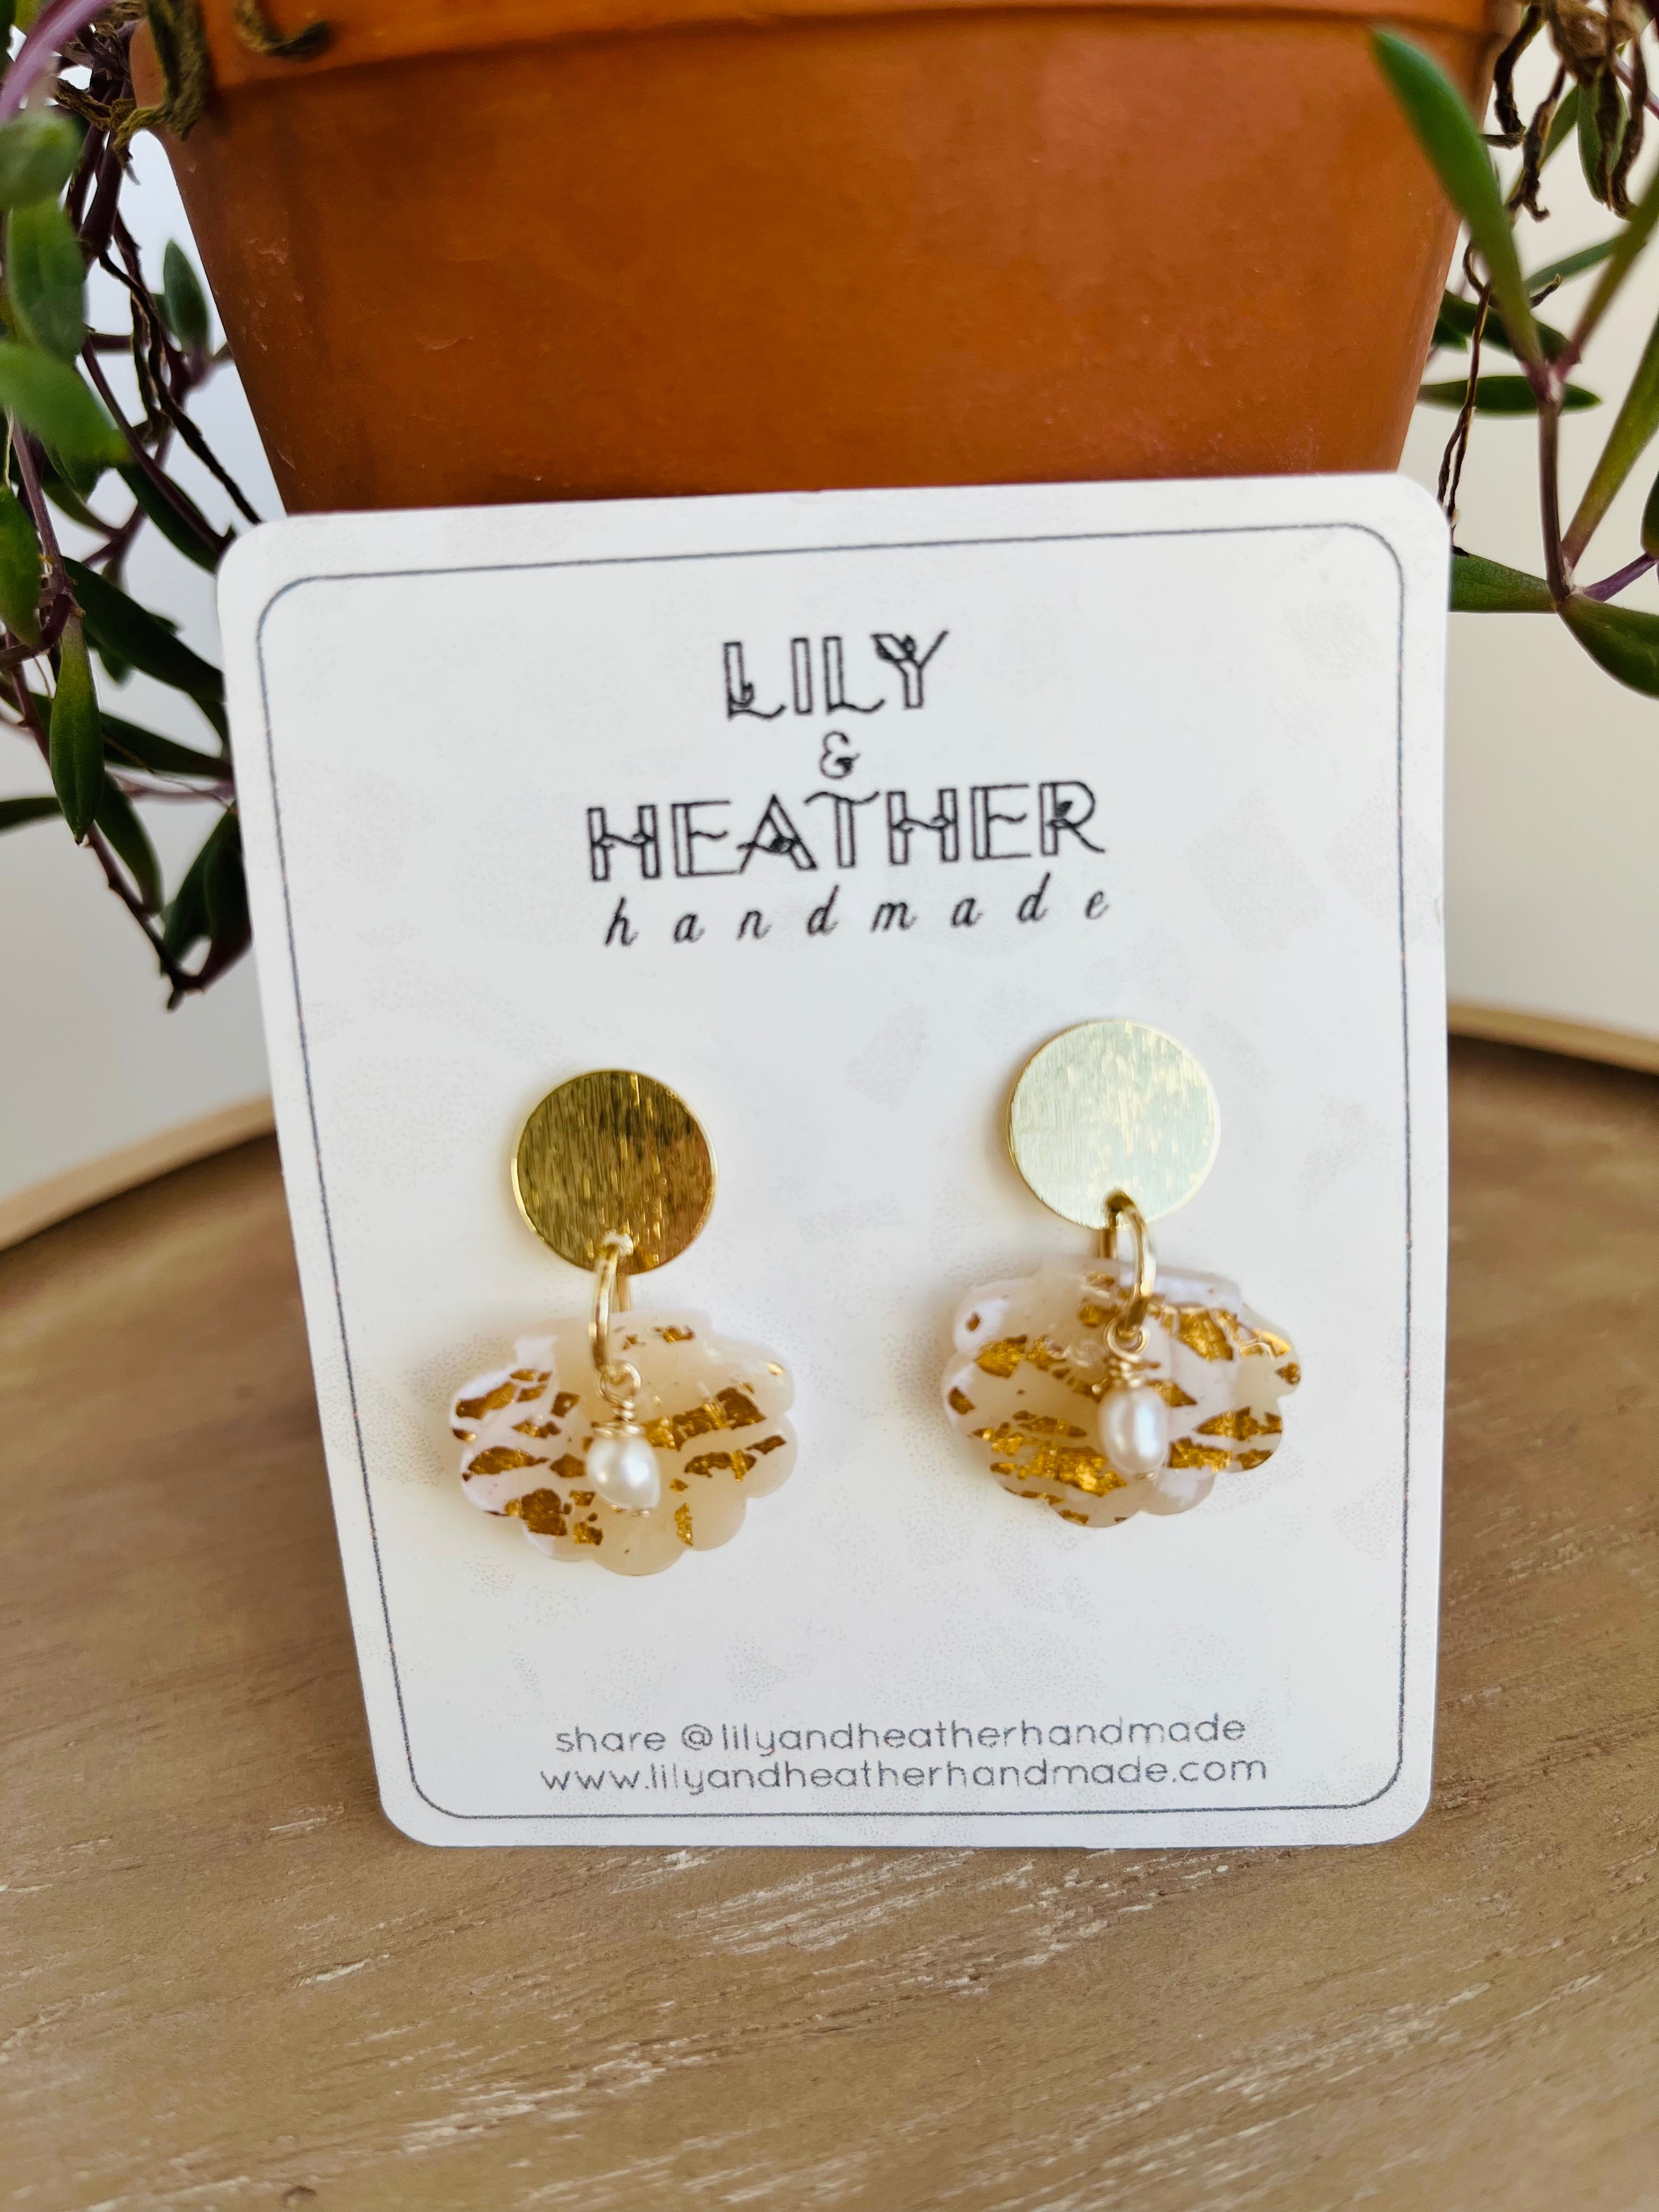 Scallops with pearl - earrings from Lily & Heather Handmade